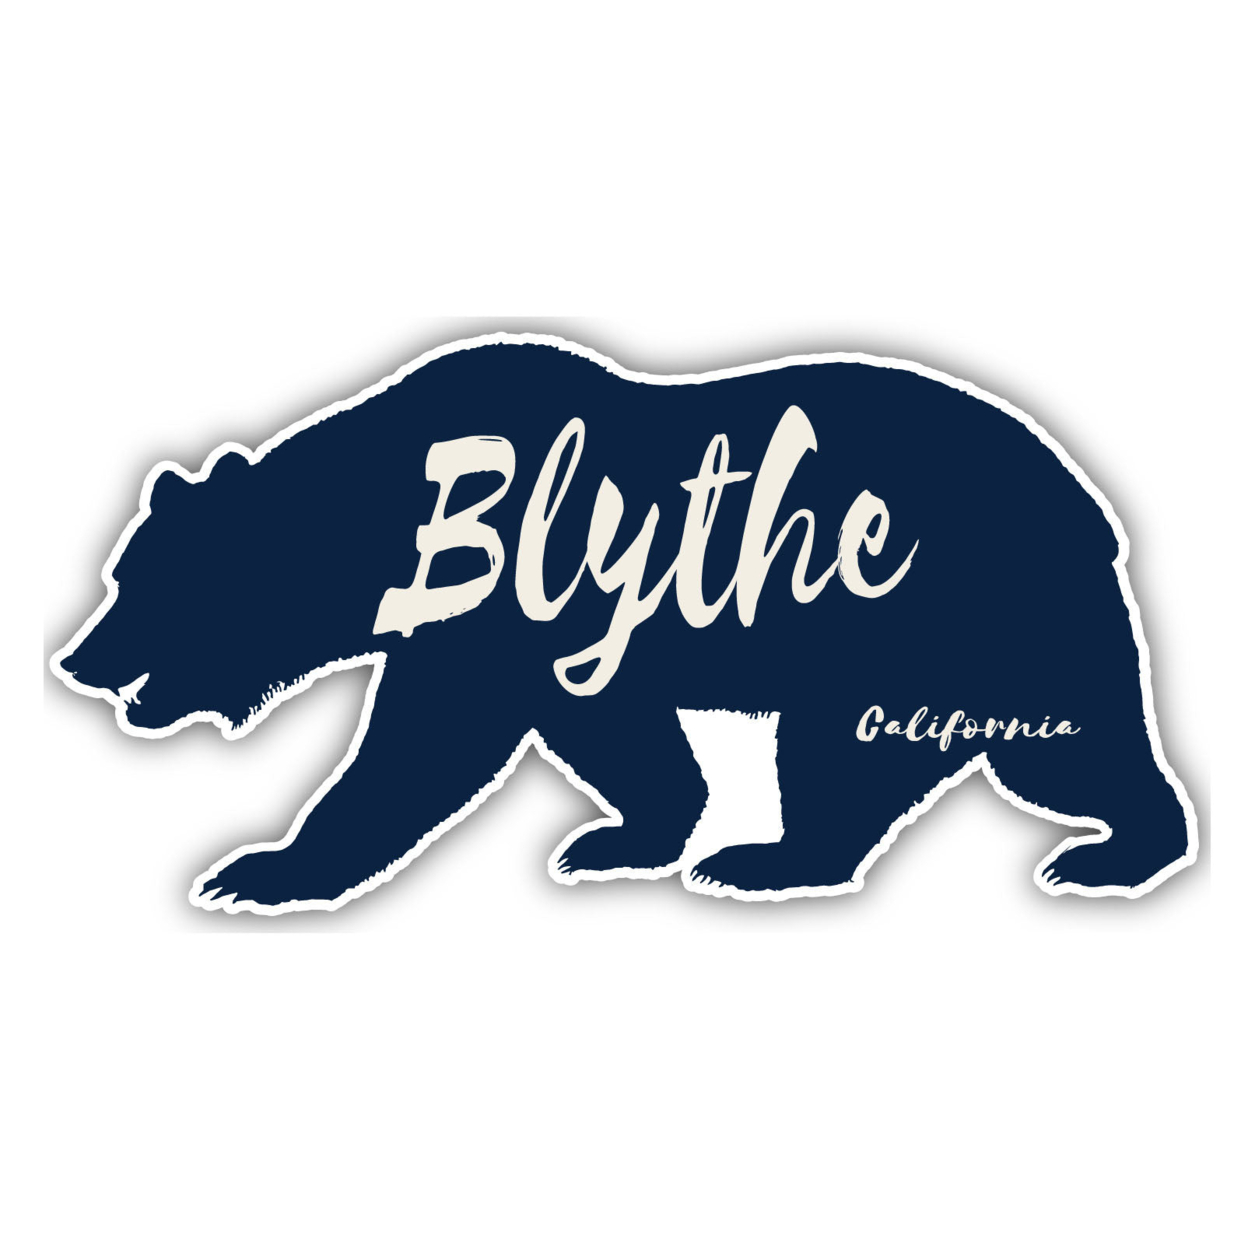 Blythe California Souvenir Decorative Stickers (Choose Theme And Size) - 4-Pack, 4-Inch, Great Outdoors